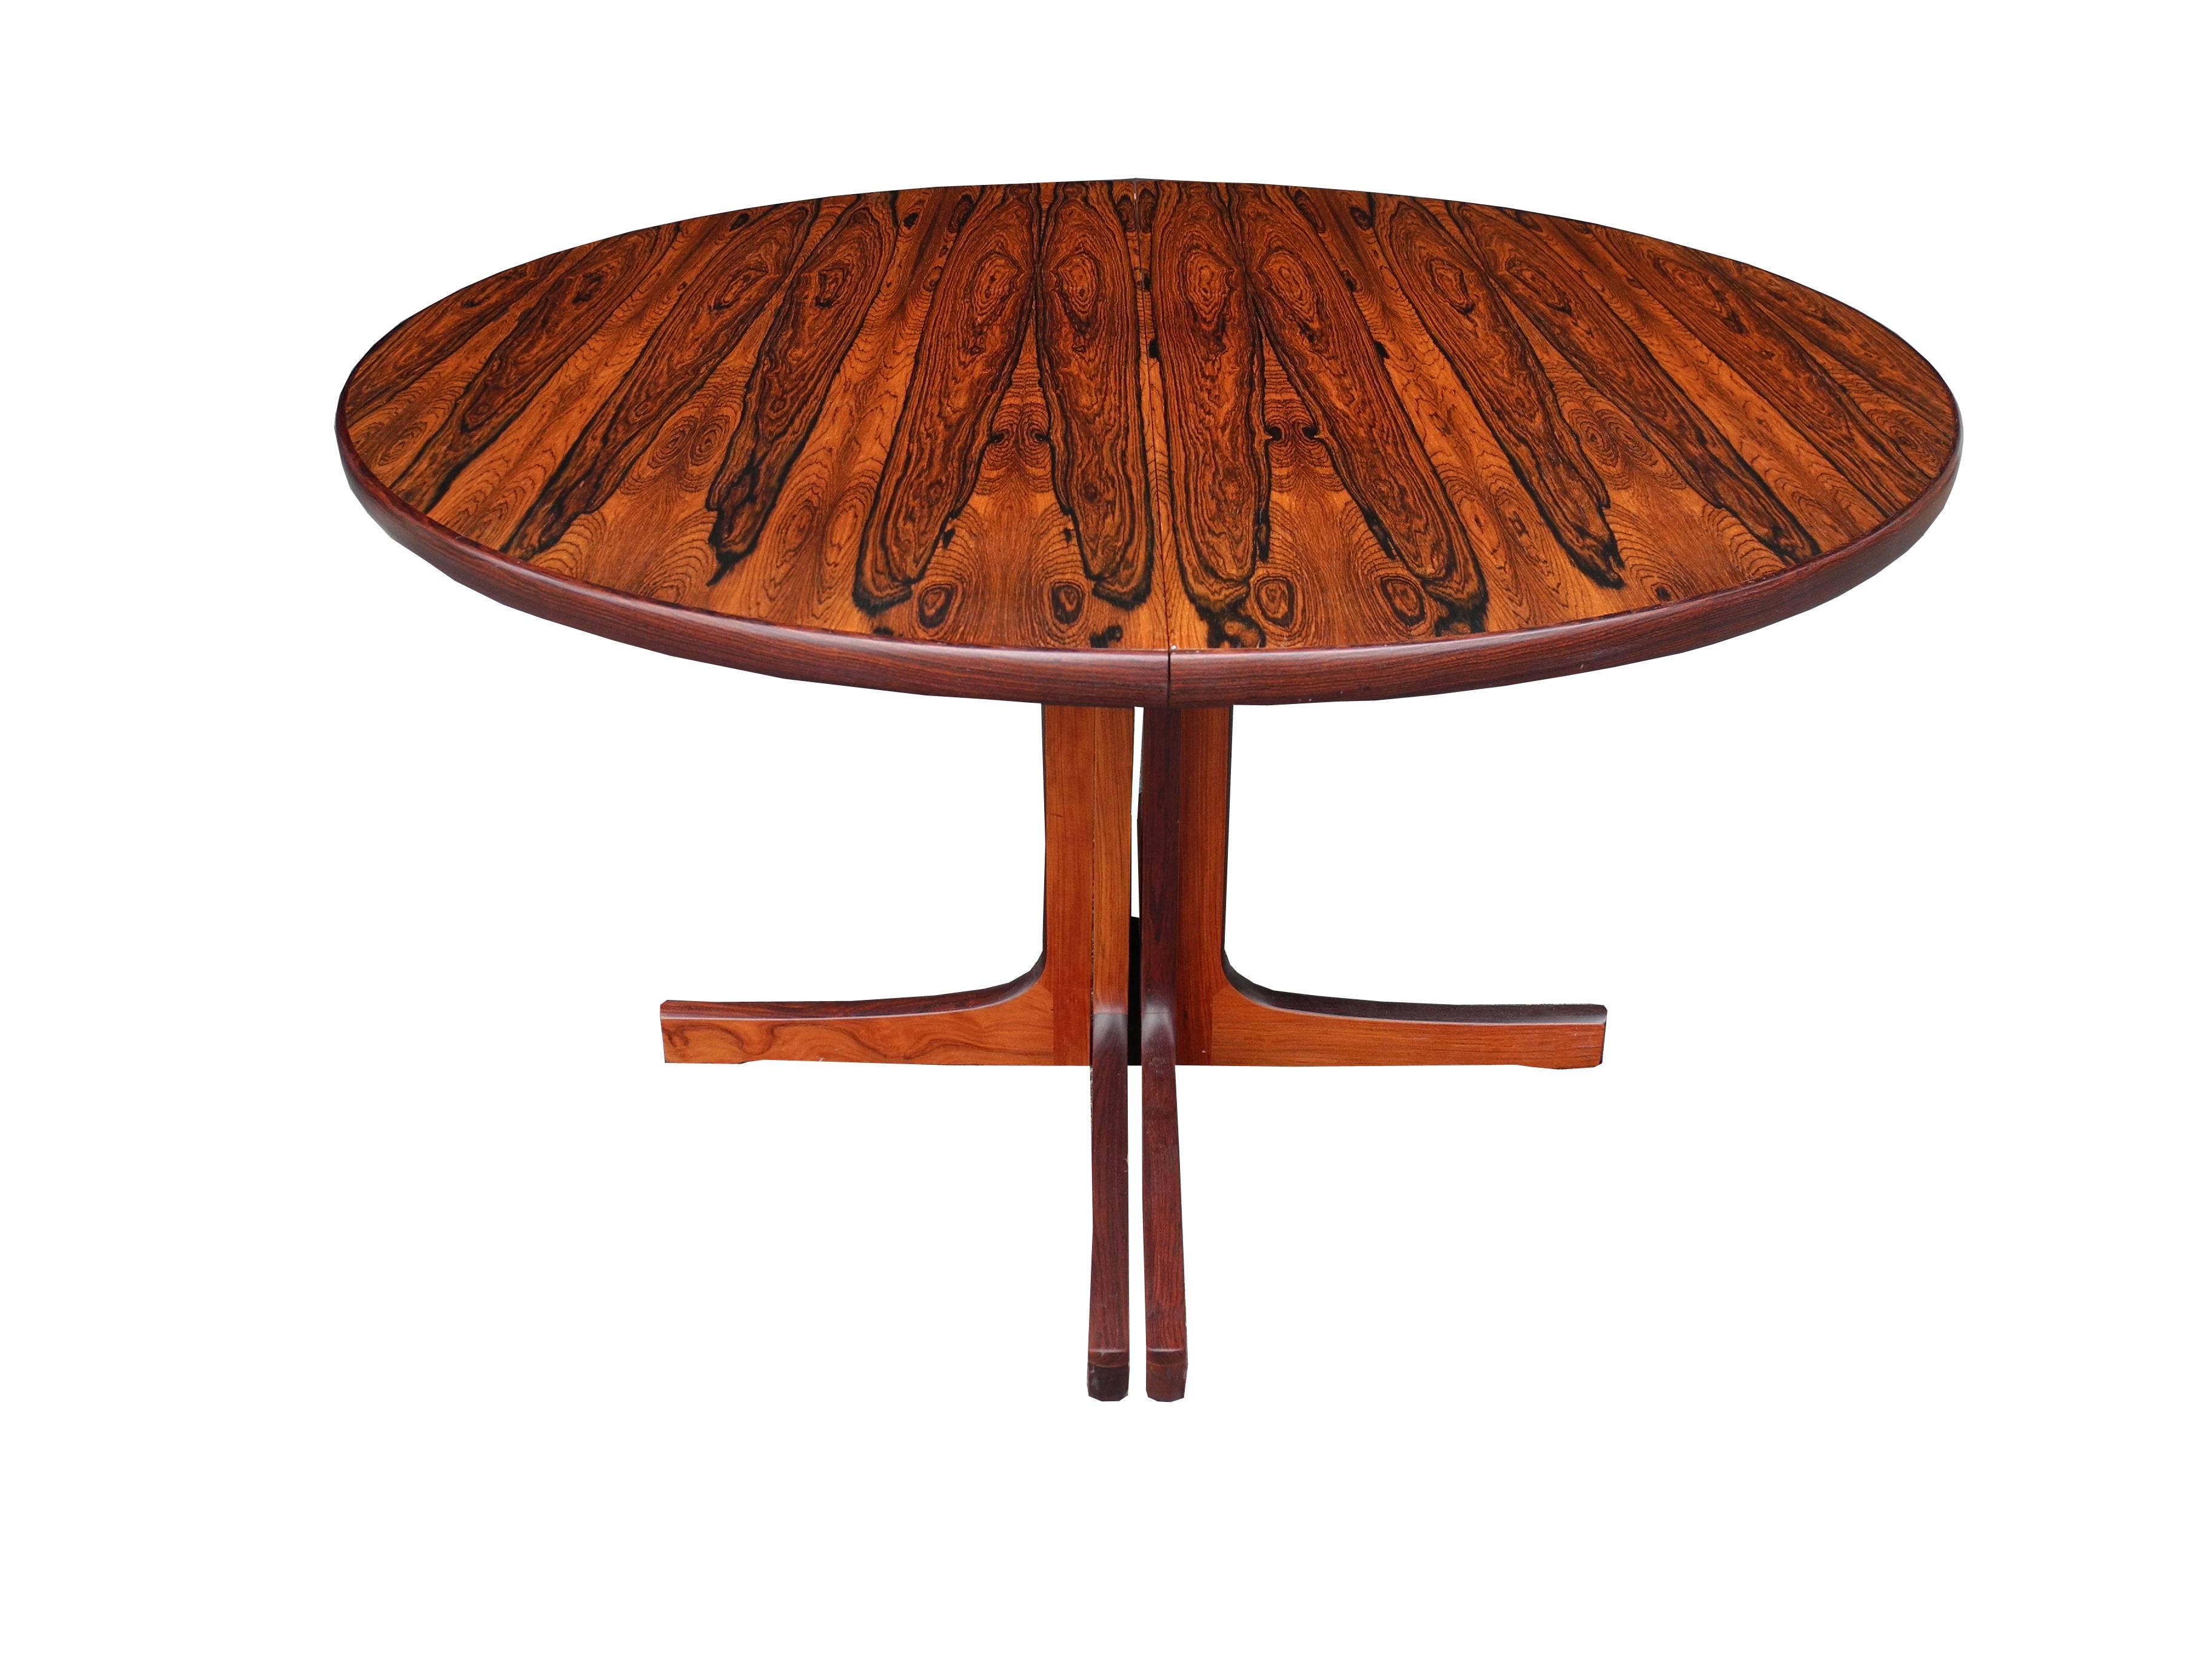 20th Century Danish Modern Round Rosewood Dining Table by Niels Otto Møller with Two Leaves